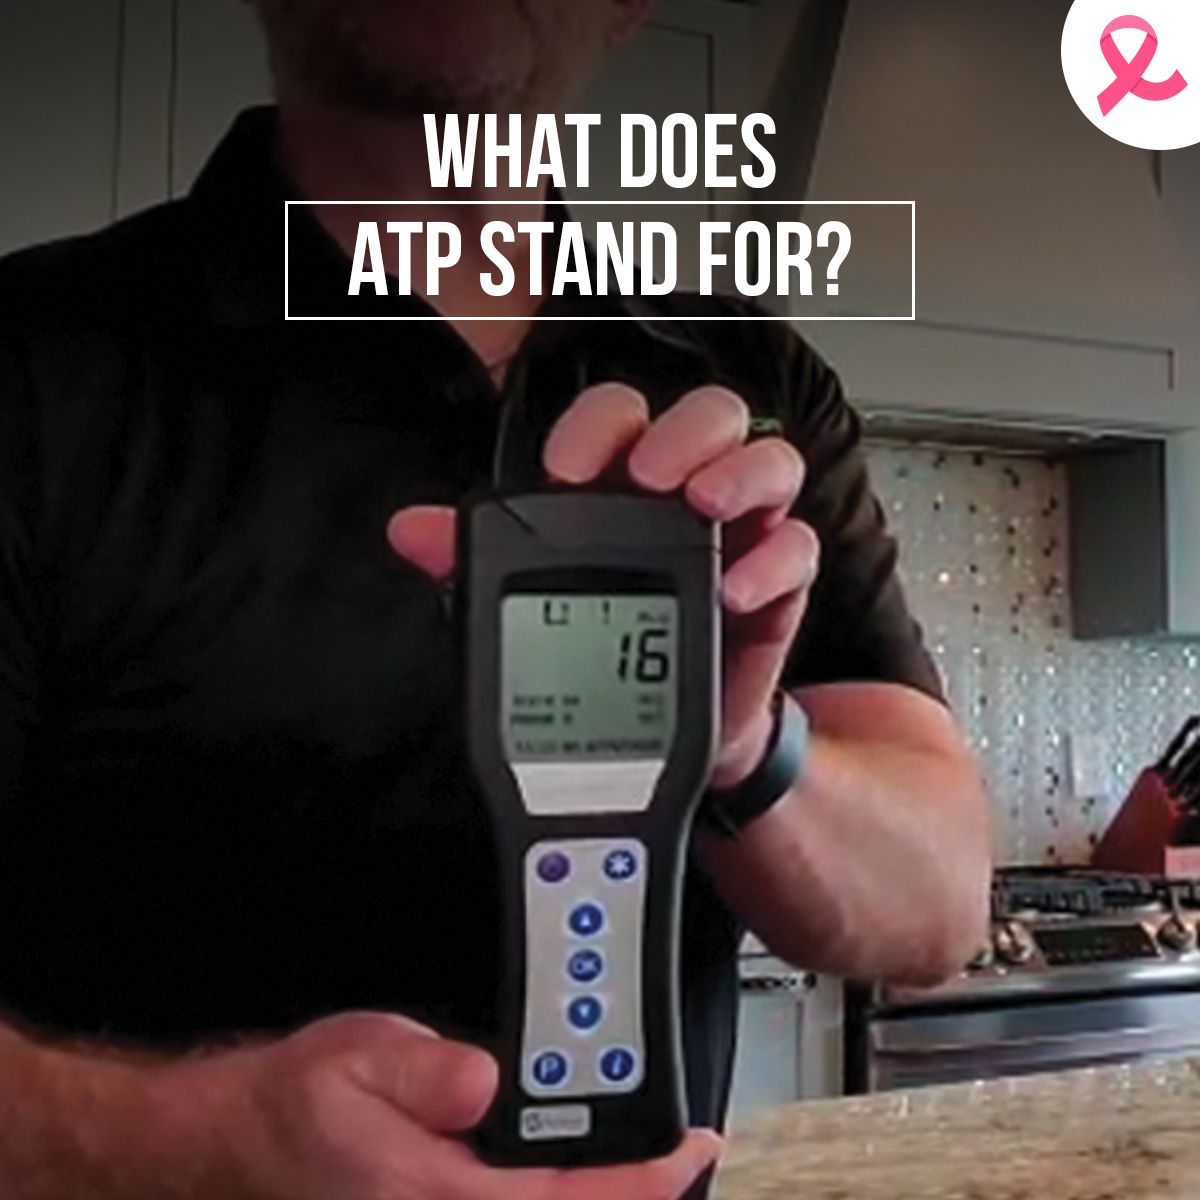 What Does ATP Stand For?